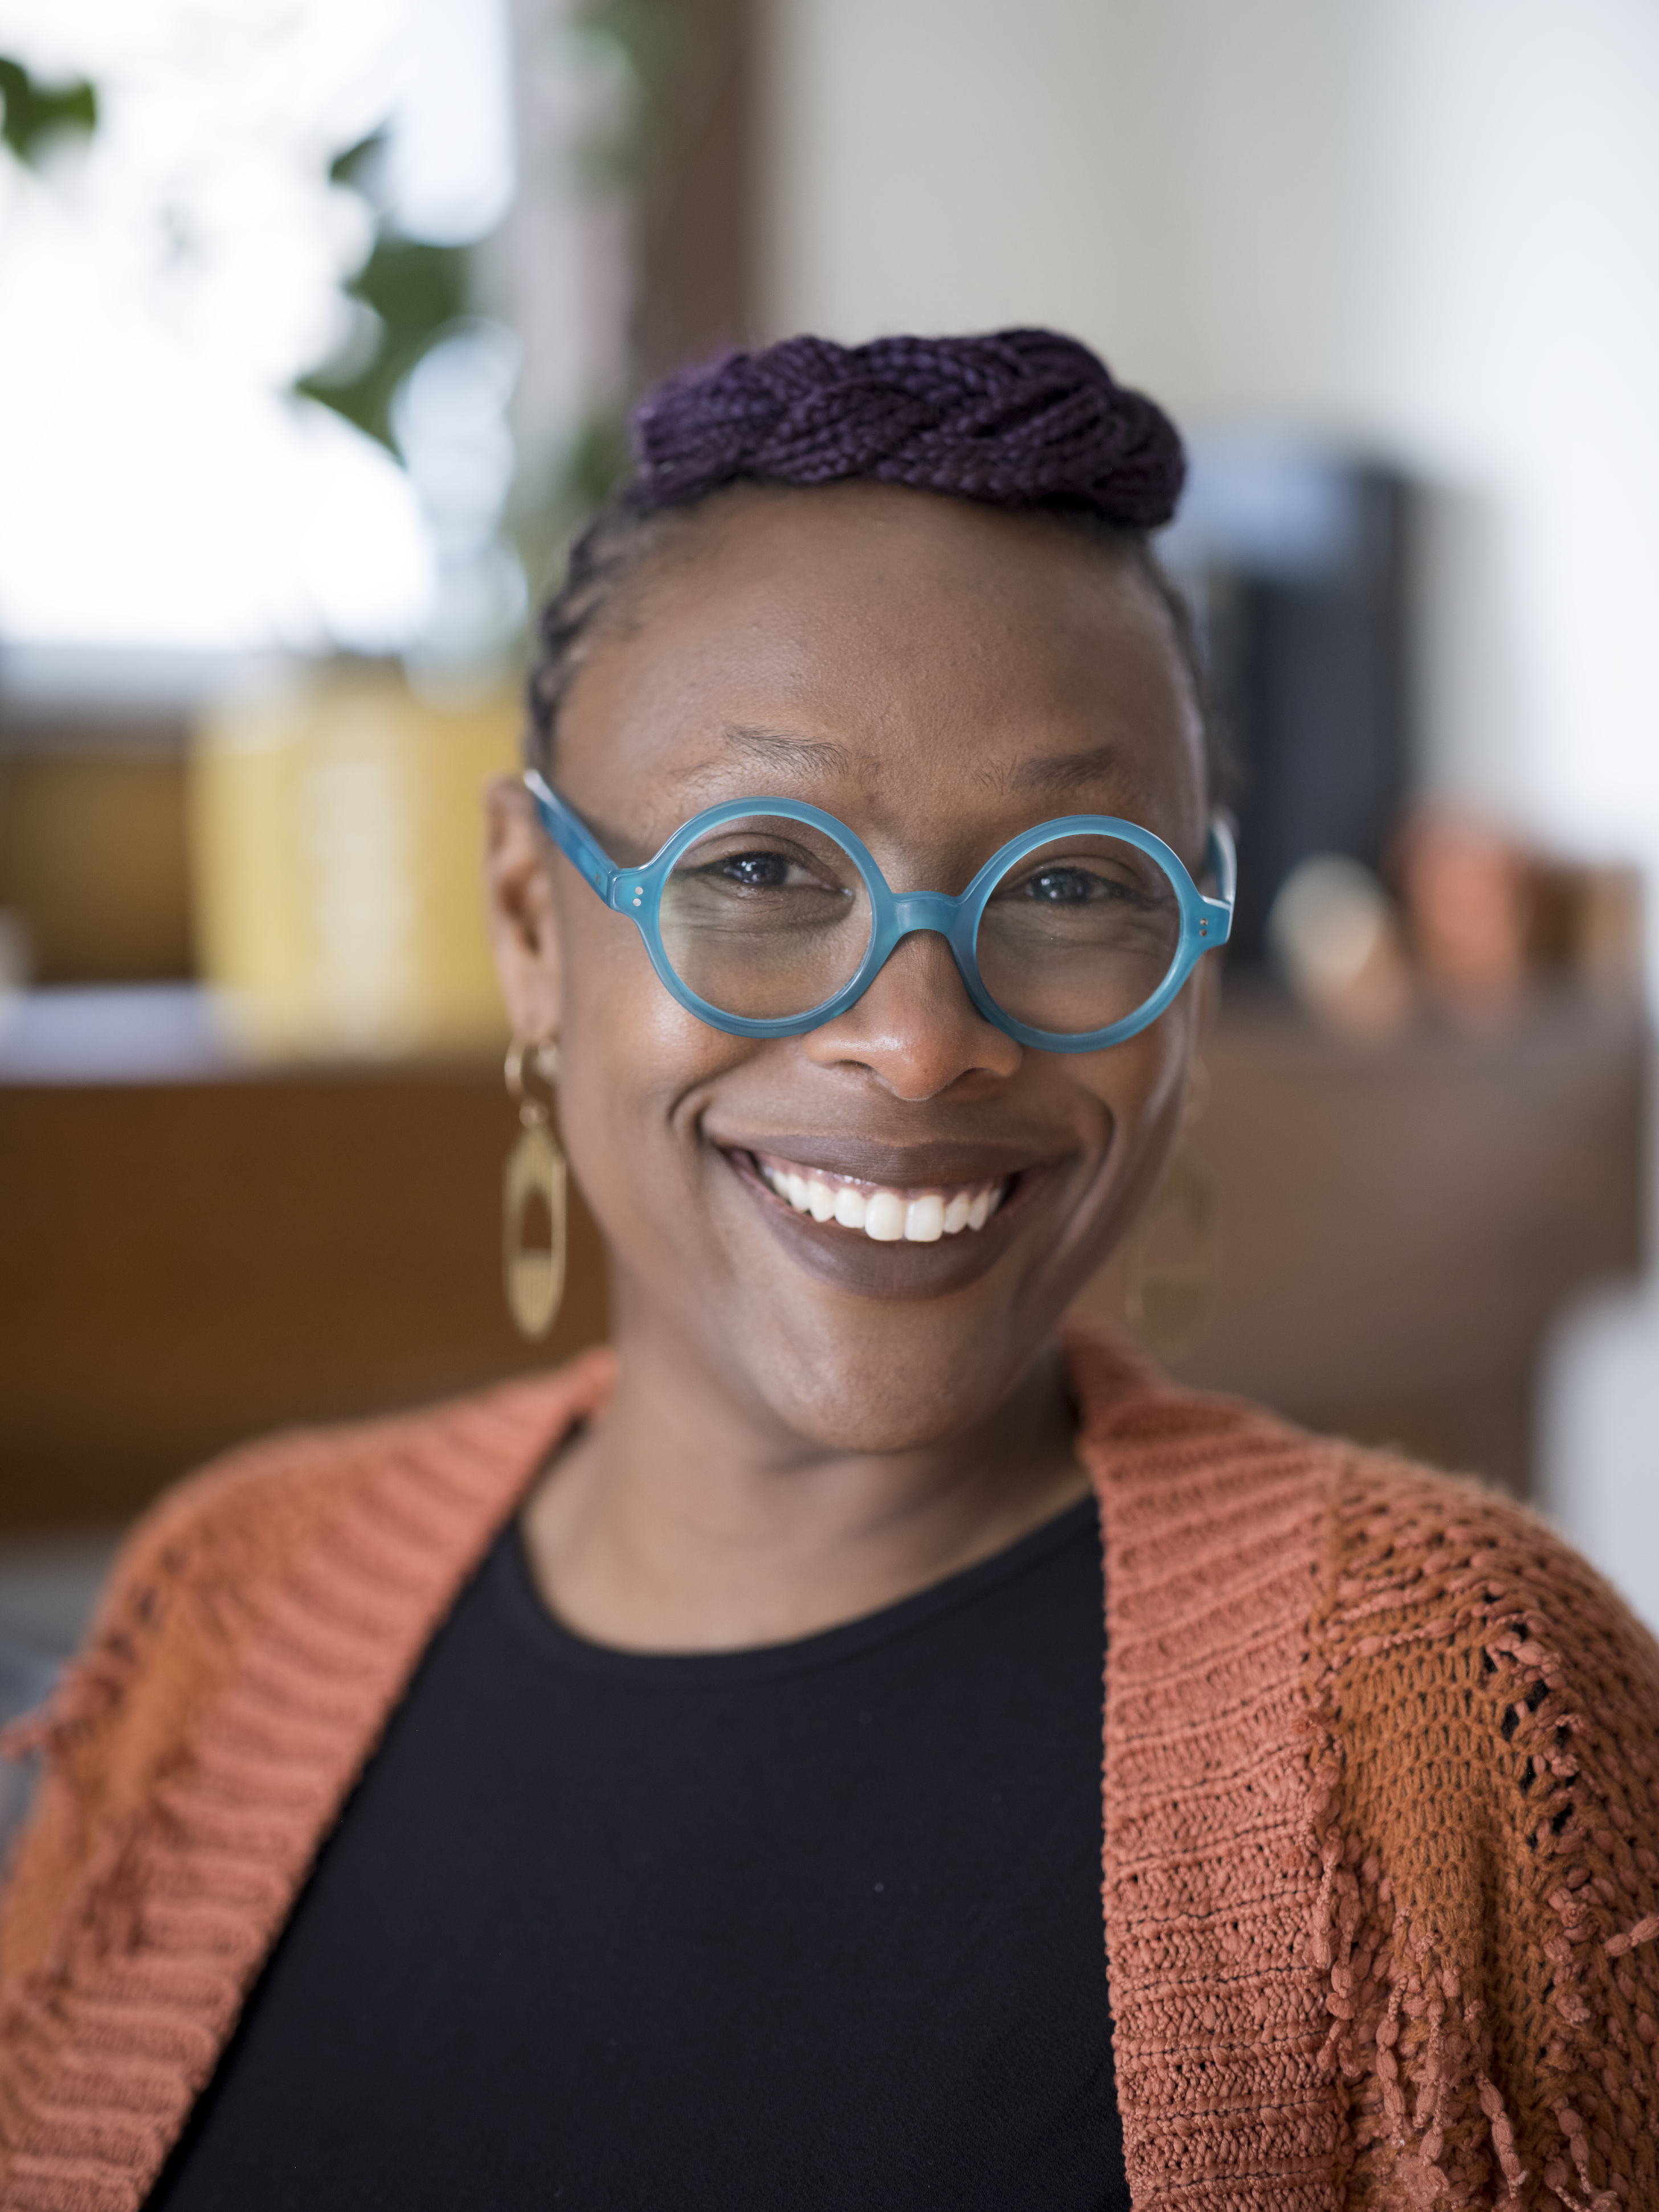 Woman smiling at camera wearing blue framed glasses